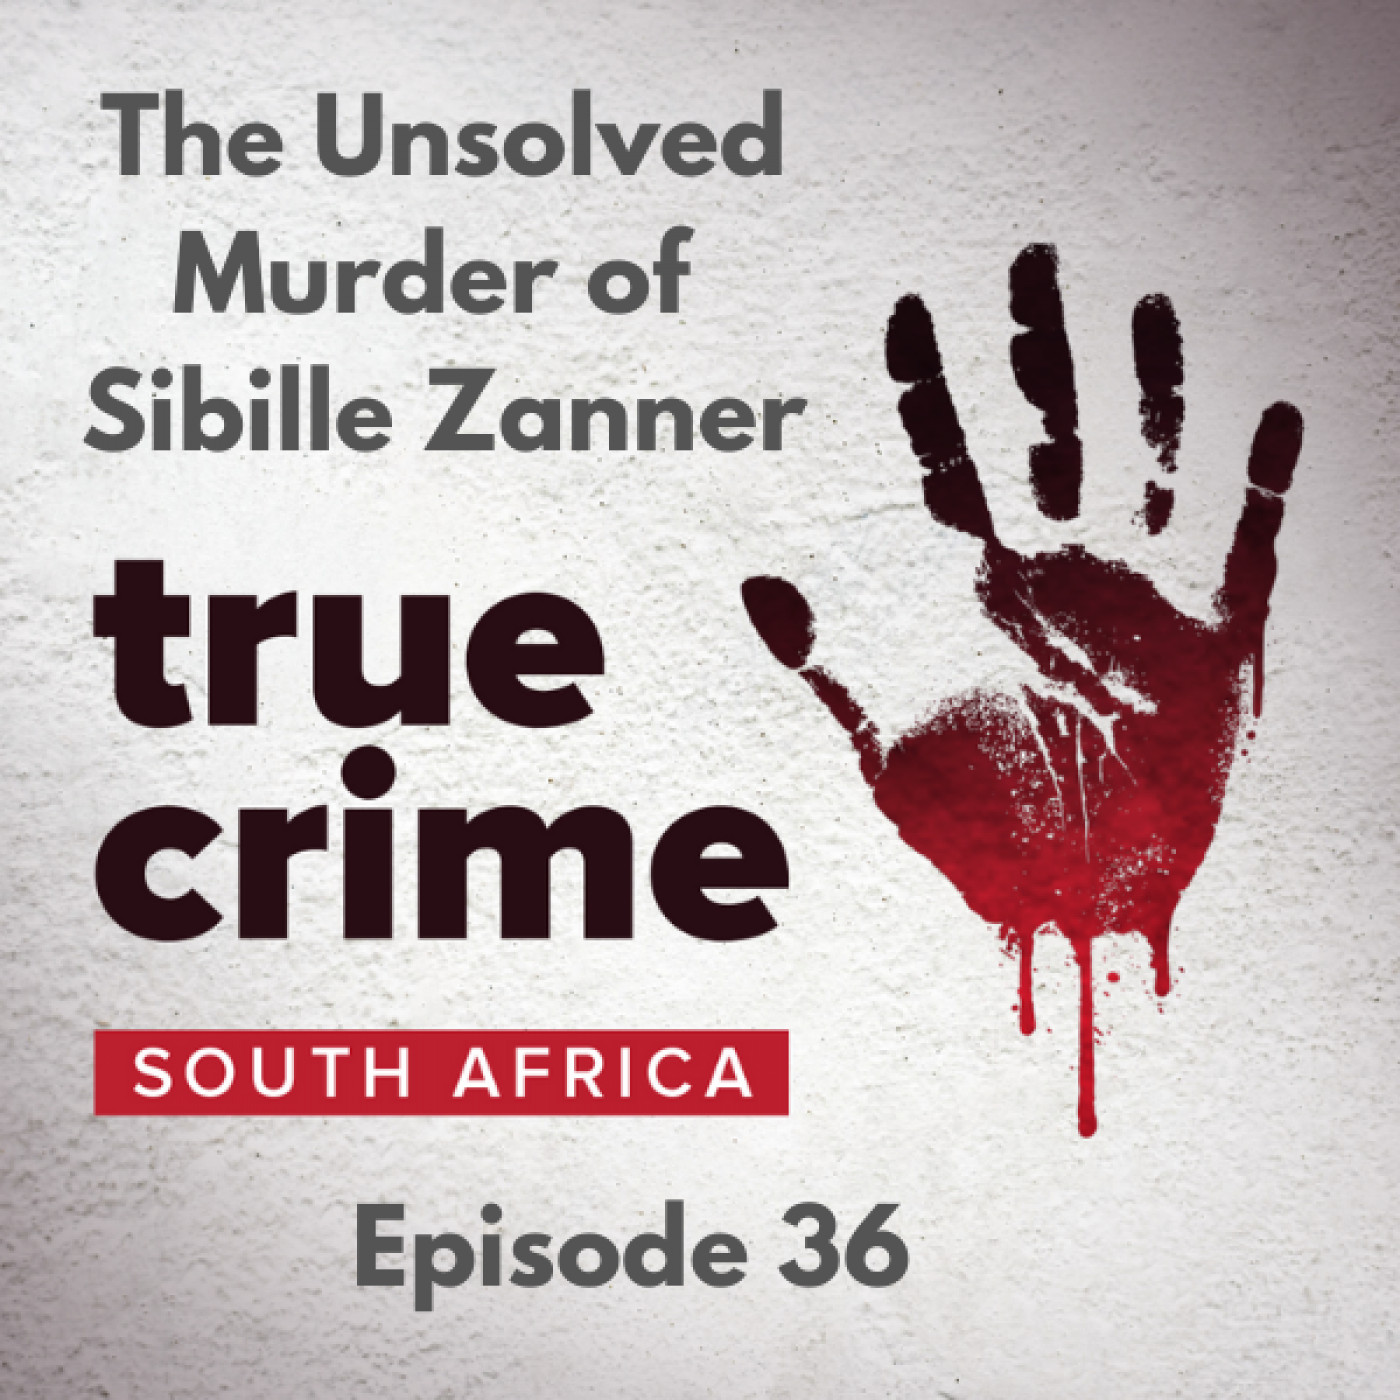 Episode 36 - The Unsolved Murder of Sibille Zanner